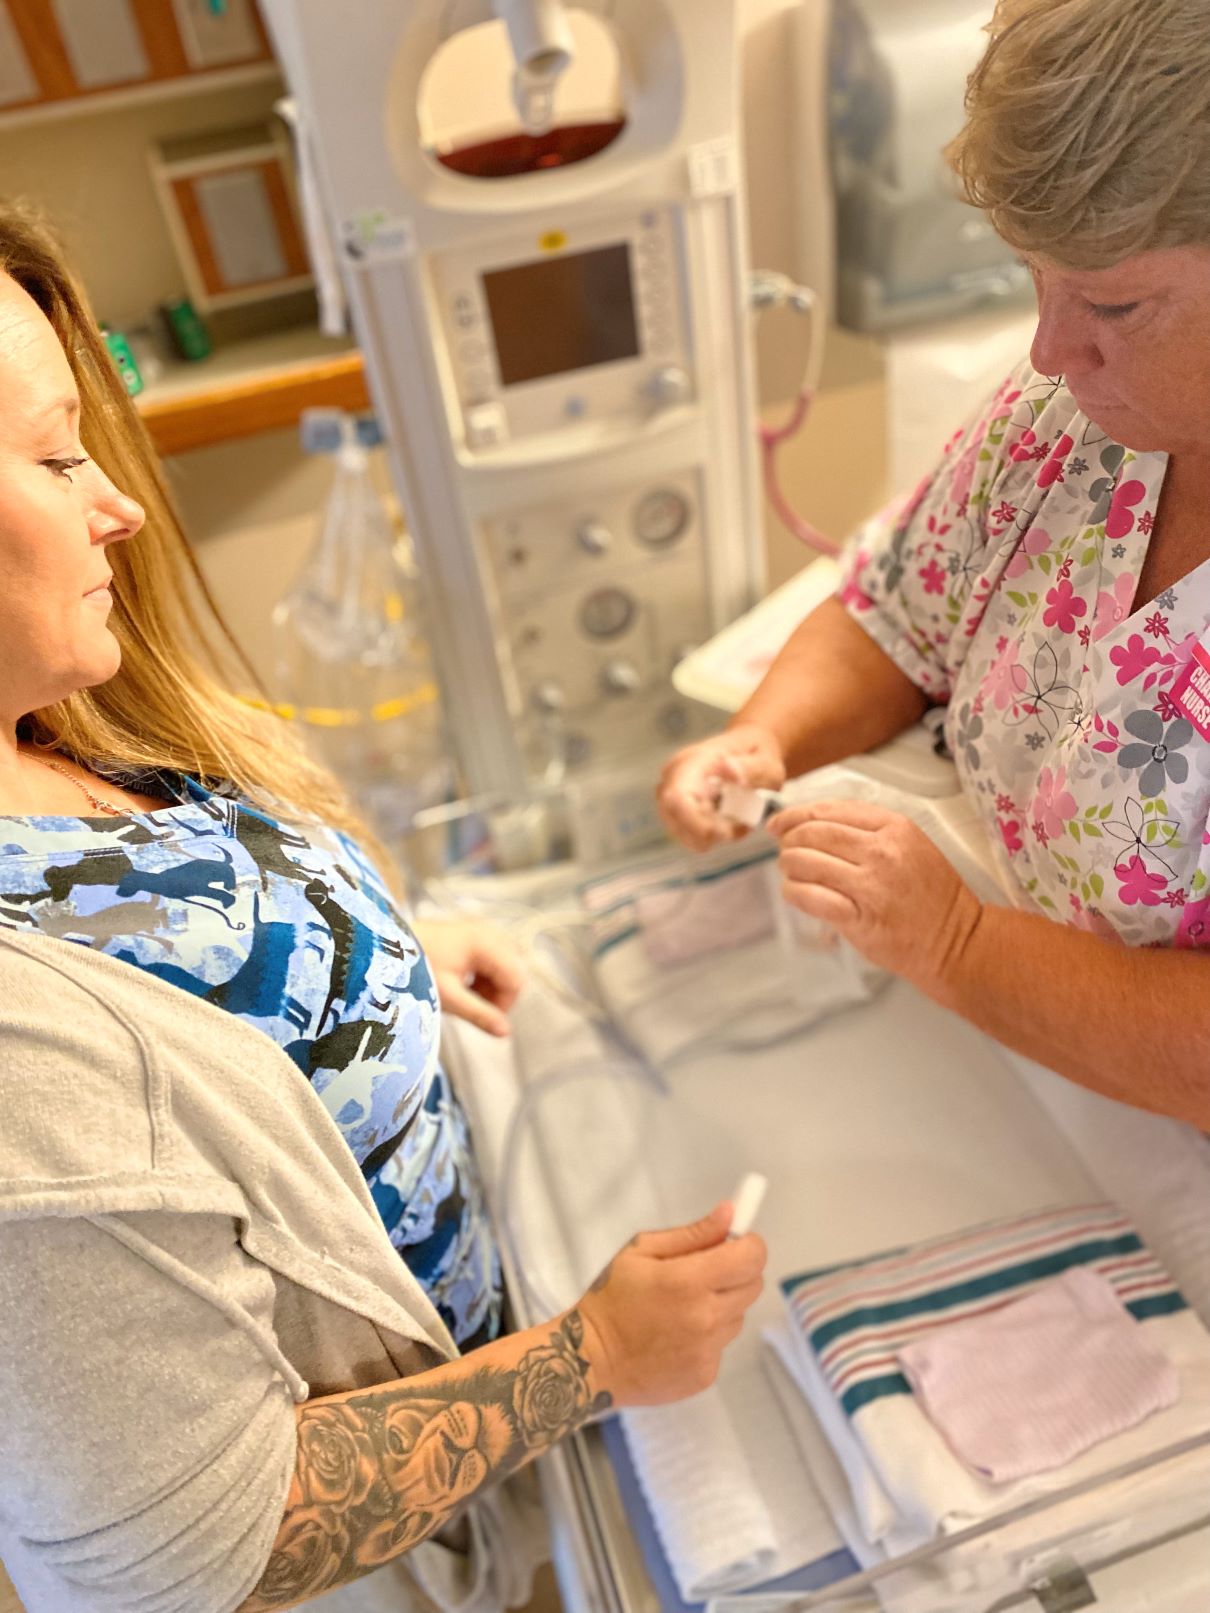 Two nurses demonstrate how to check a newborn’s vital signs.